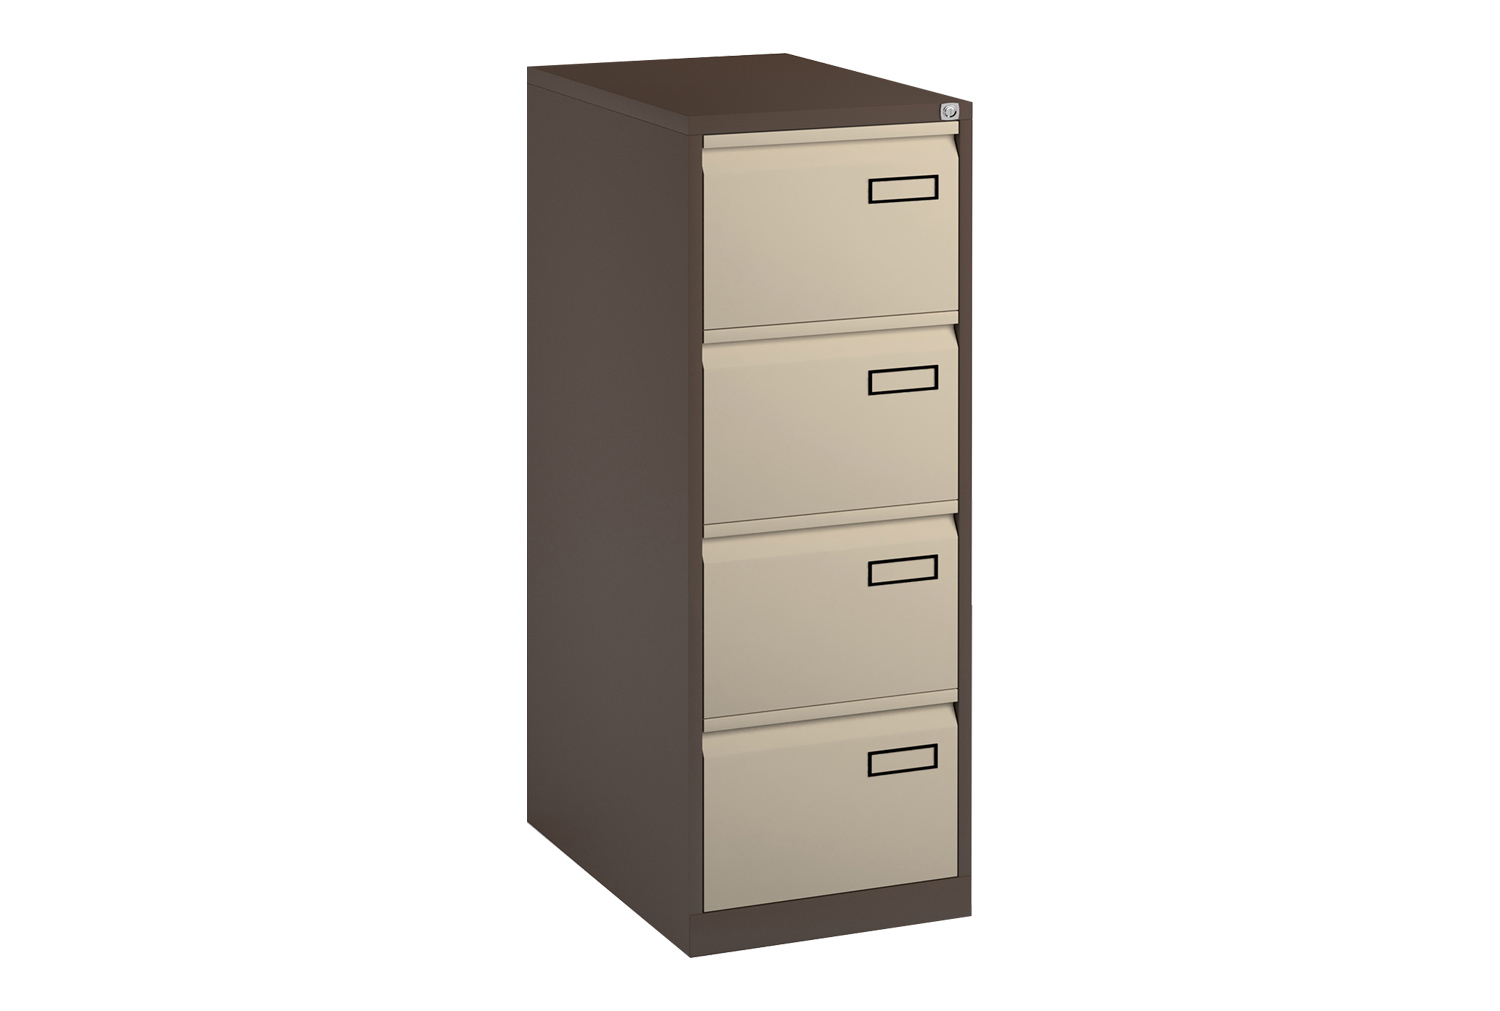 Executive Filing Cabinet, 4 Drawer - 47wx62dx132h (cm), Coffee/Cream, Fully Installed